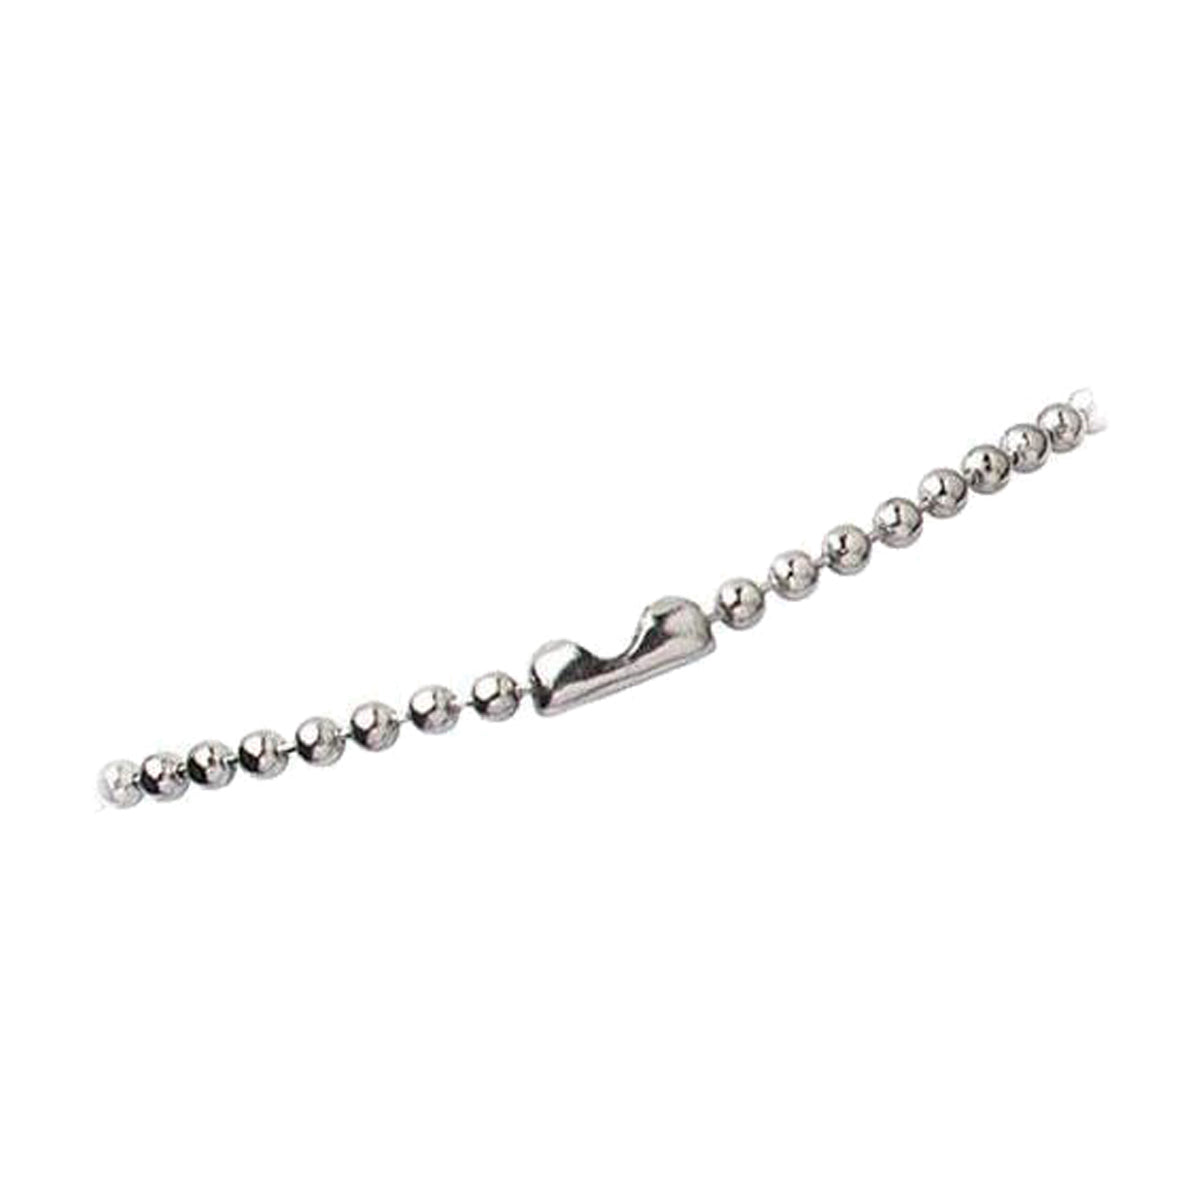 #3 Stainless Steel Ball Chains with Connector - 24 inch Length